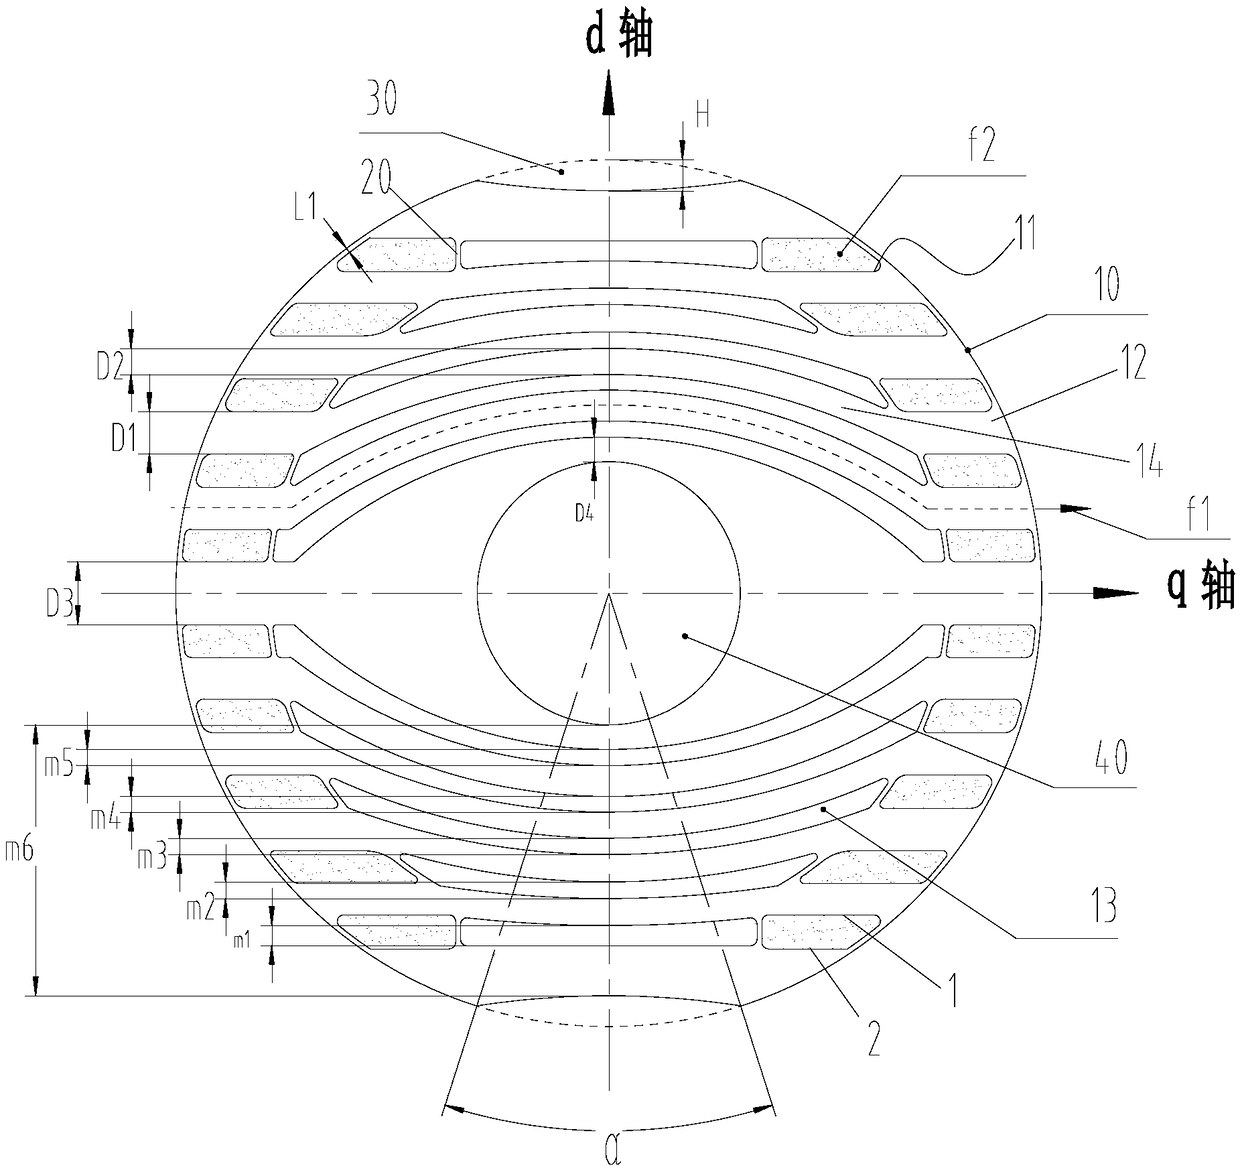 Rotor structure, asynchronous starting synchronization reluctance motor and compressor